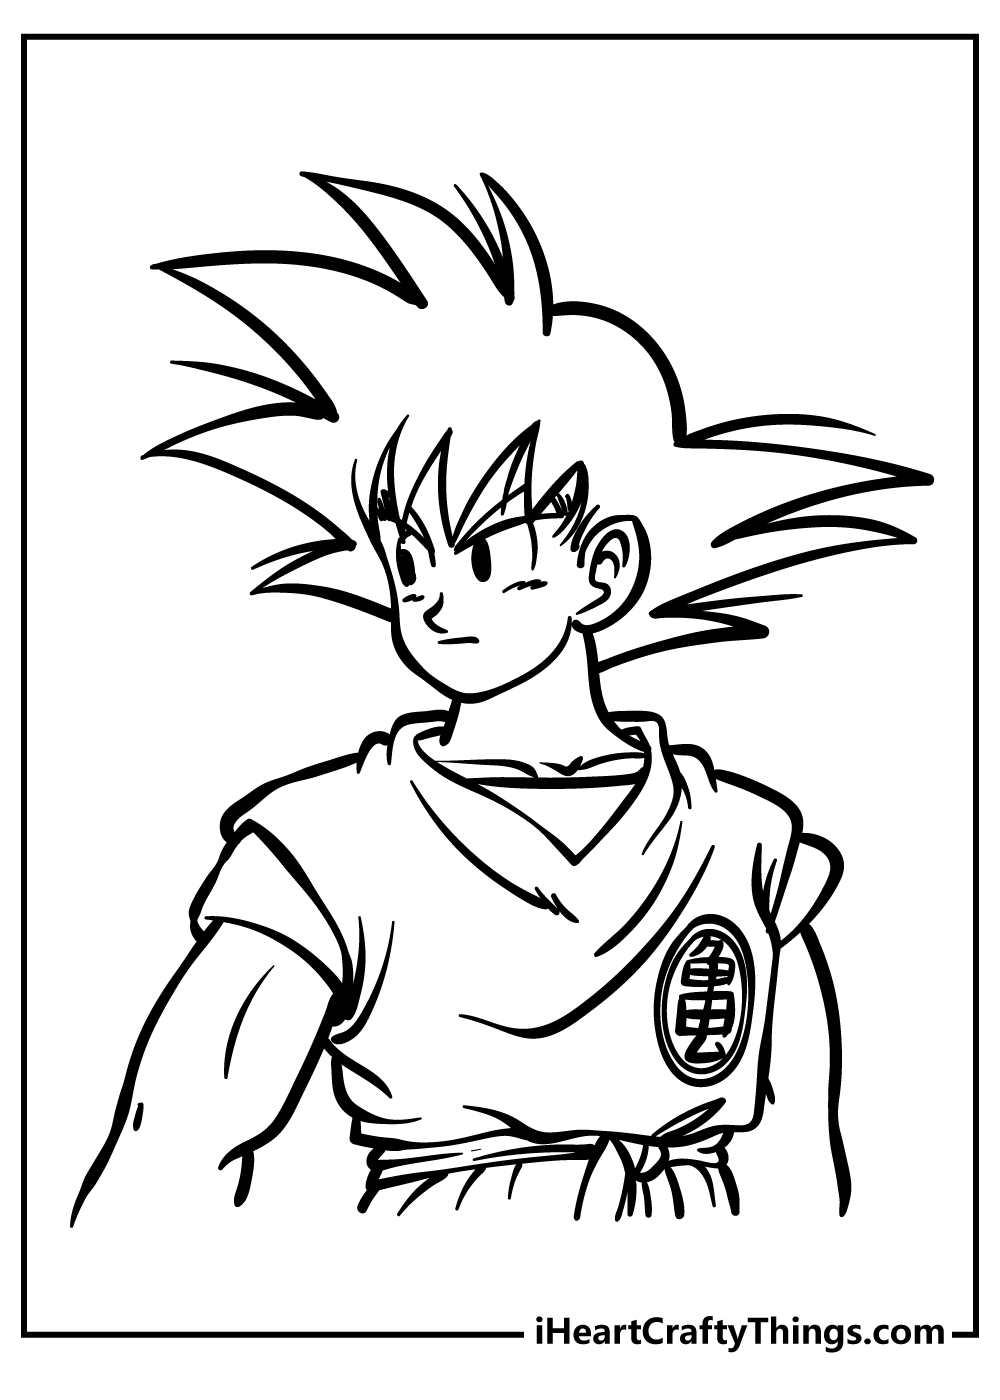 Goku Coloring Pages for adults free printable